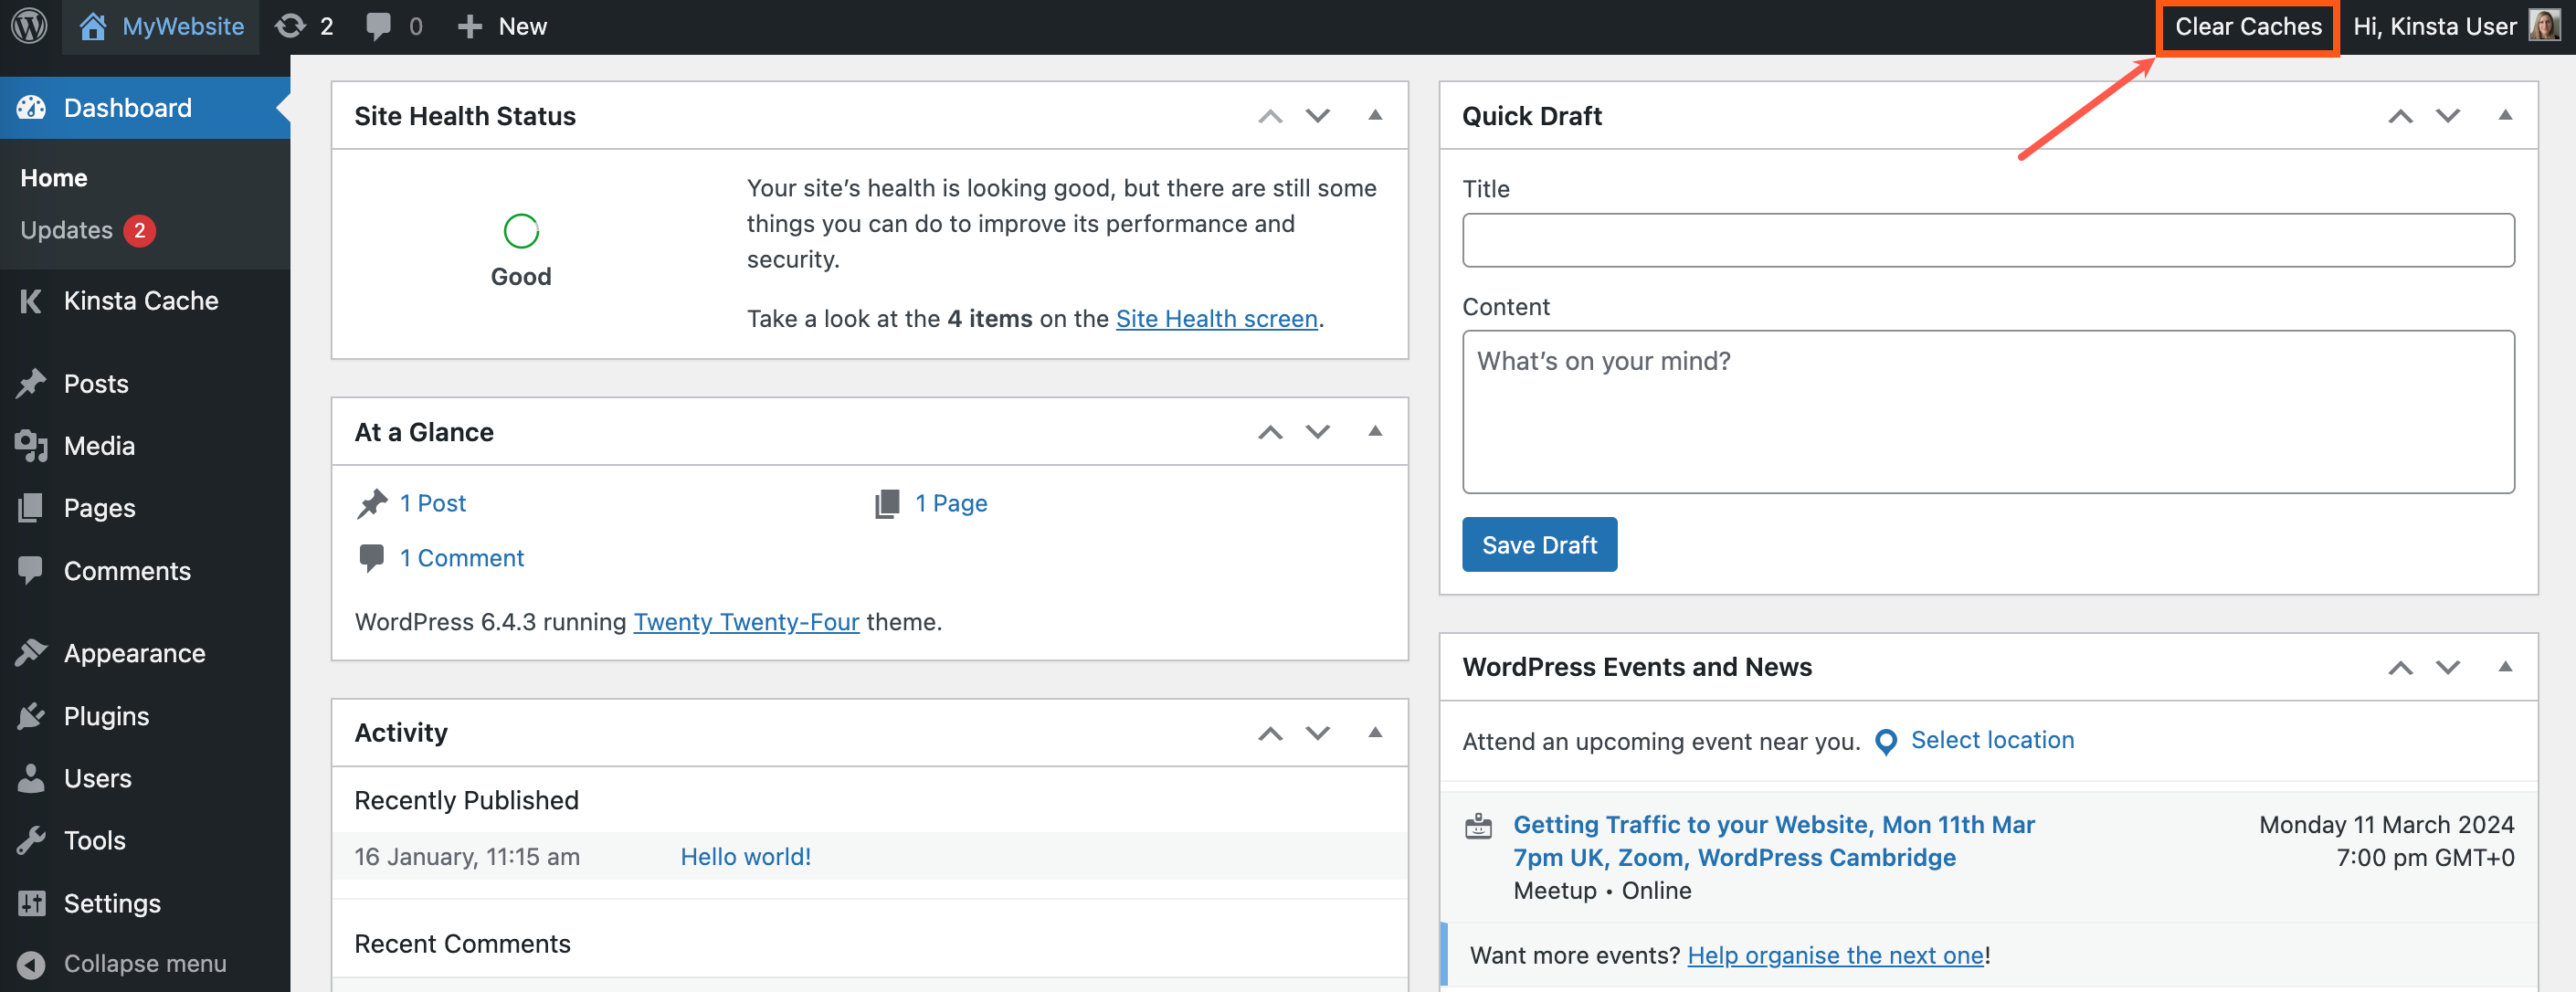 Screenshot of the WordPress admin dashboard with the Clear Caches menu entry highlighted.